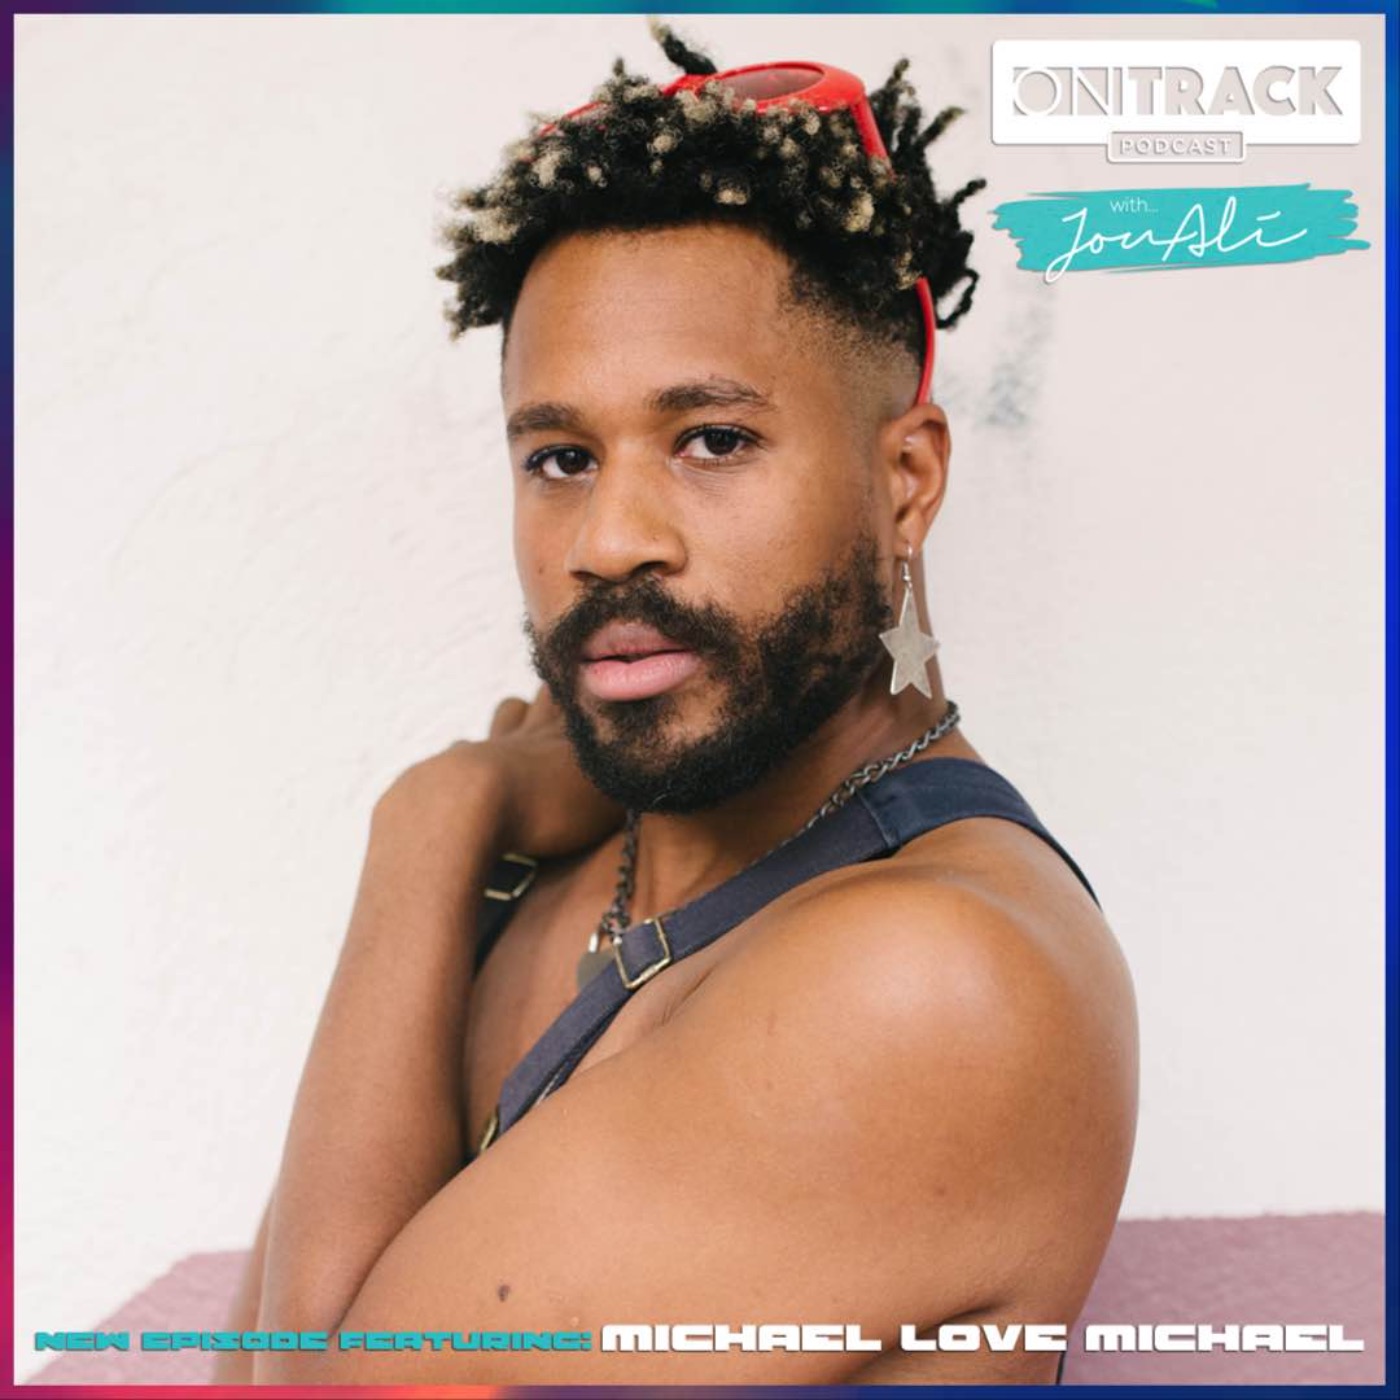 cover art for On Track with Michael Love Michael